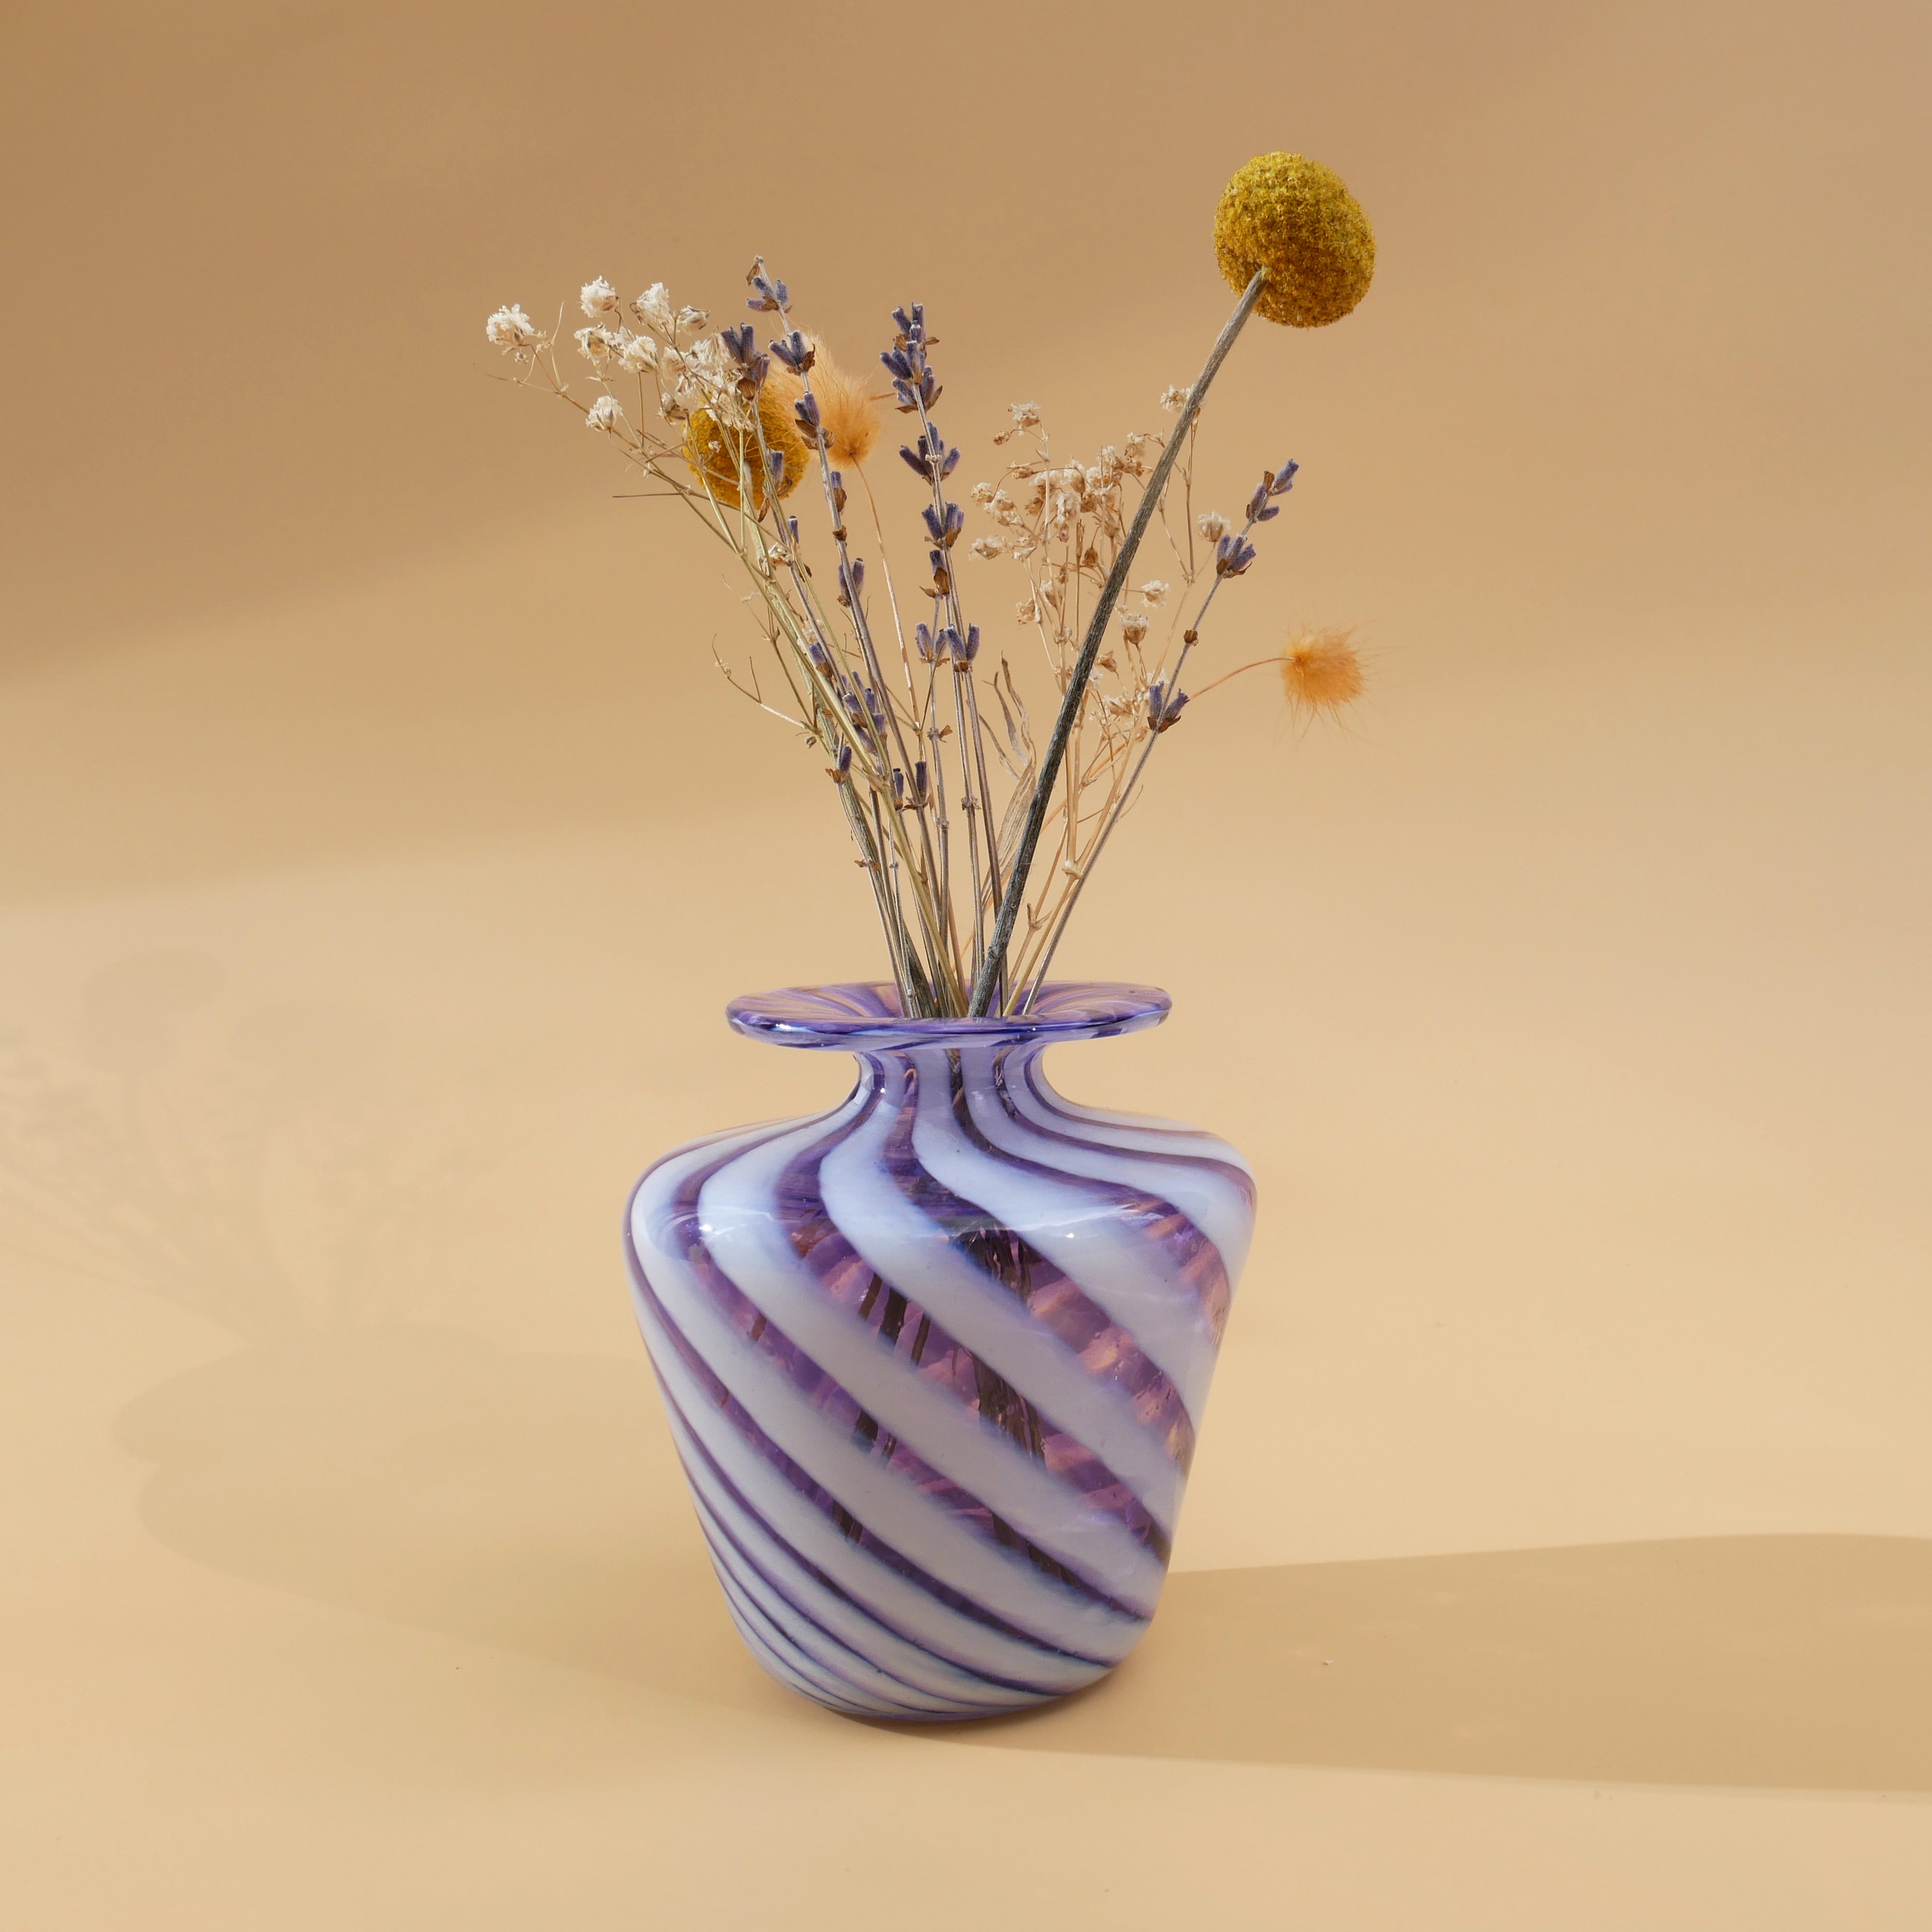 LILAC CANDY STRIPED SMALL GLASS VASE